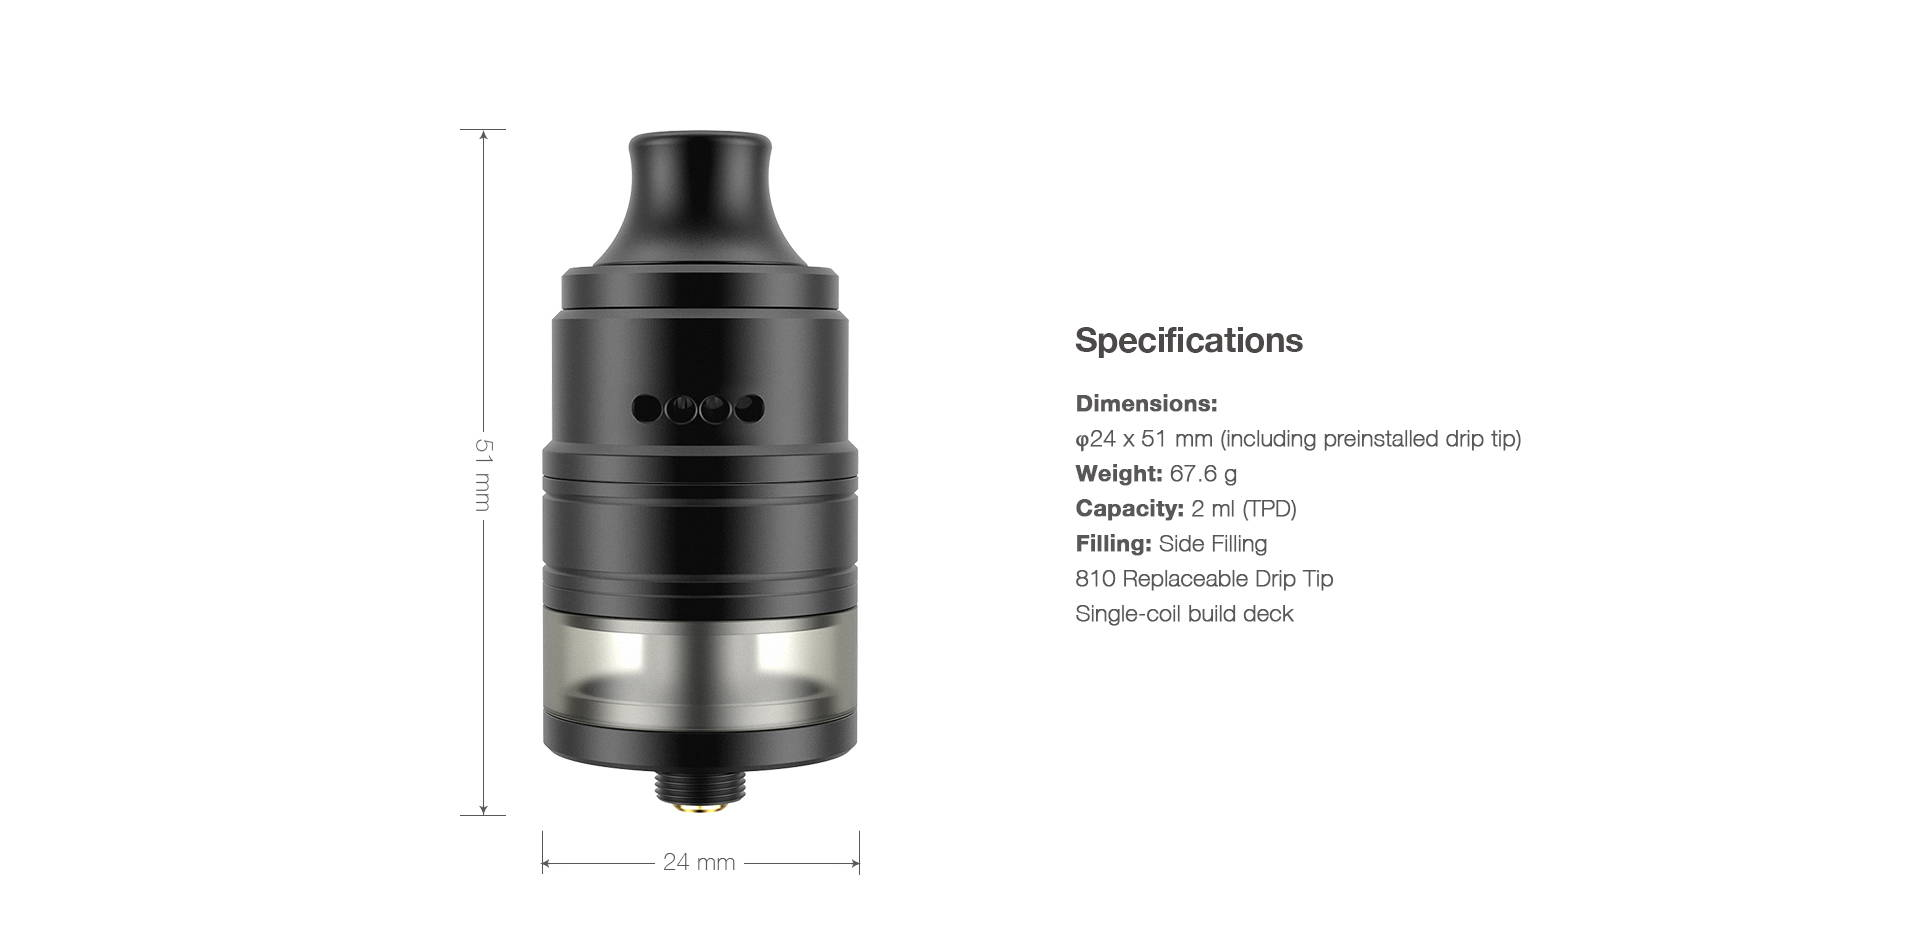 Dimensions:  φ24 x 51 mm (including preinstalled drip tip) Weight: 67.6 g Capacity: 3.5 ml / 2 ml (TPD) Filling: Side Filling   810 Replaceable Drip Tip Single-coil build deck